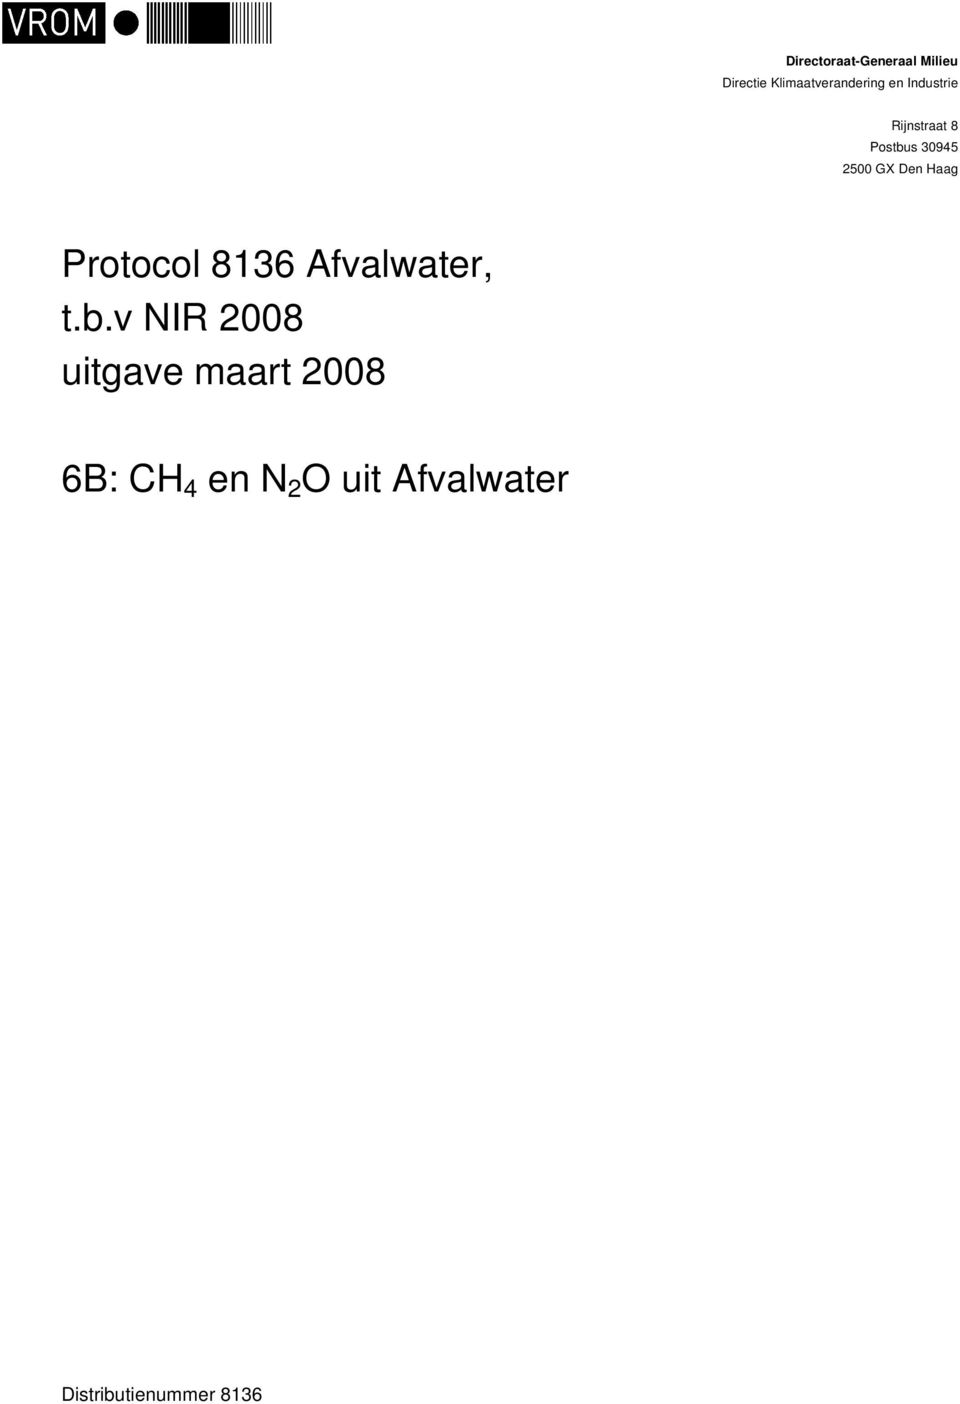 Protocol 8136 Afvalwater, t.b.